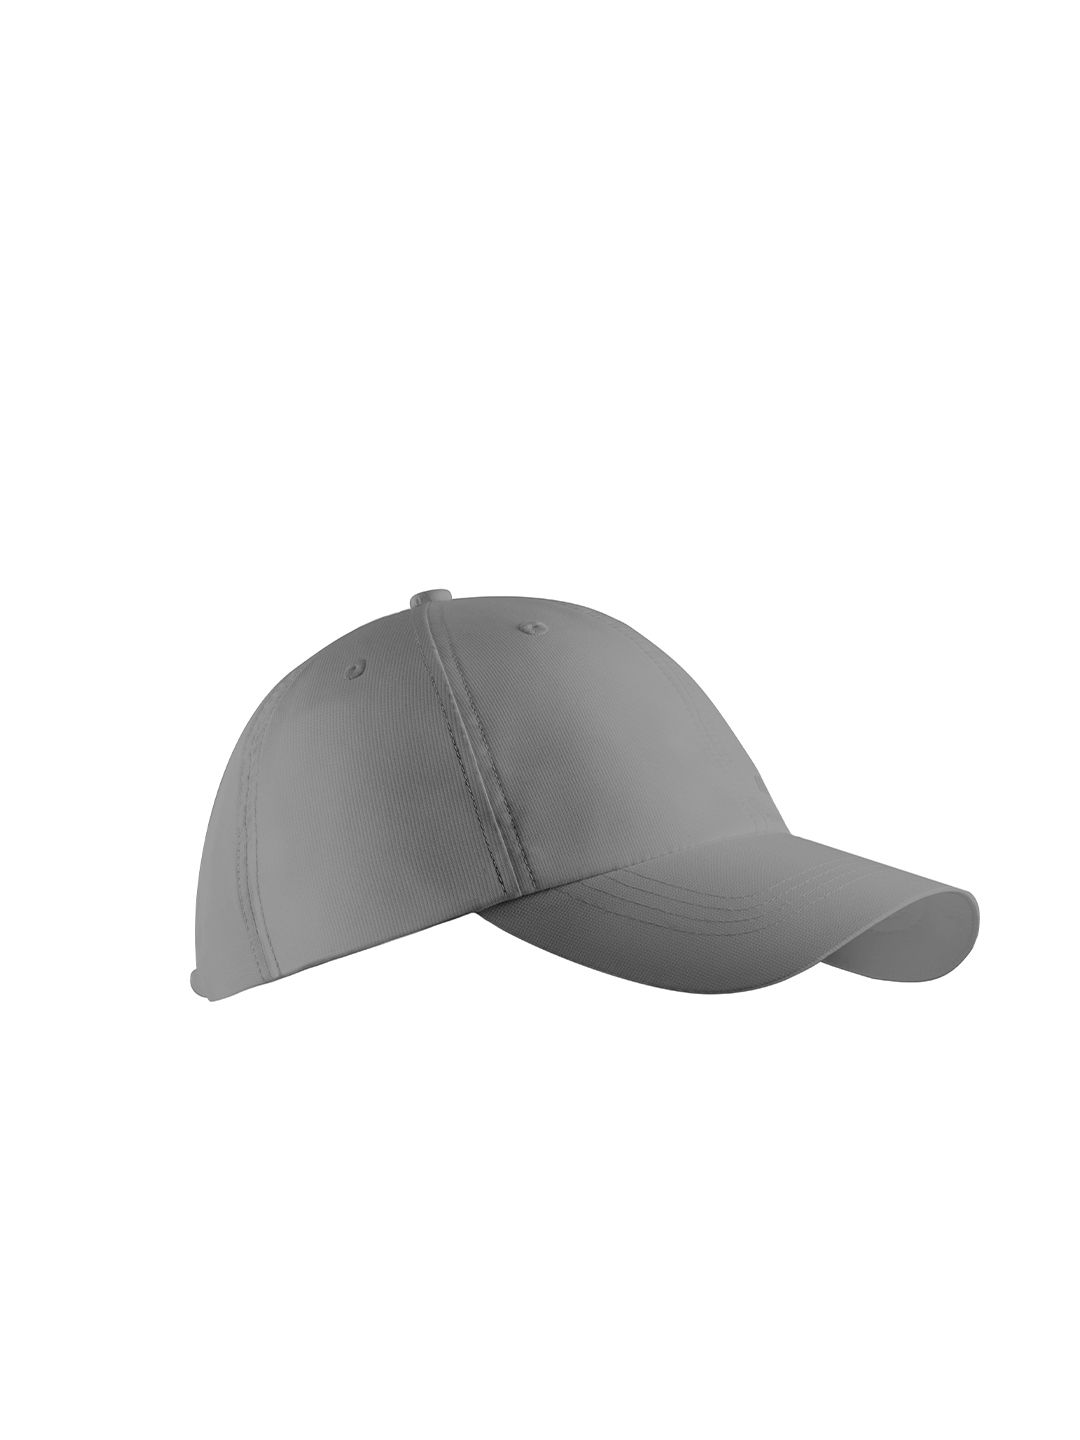 Inesis By Decathlon Unisex Grey Solid Breathable Golf Cap Price in India